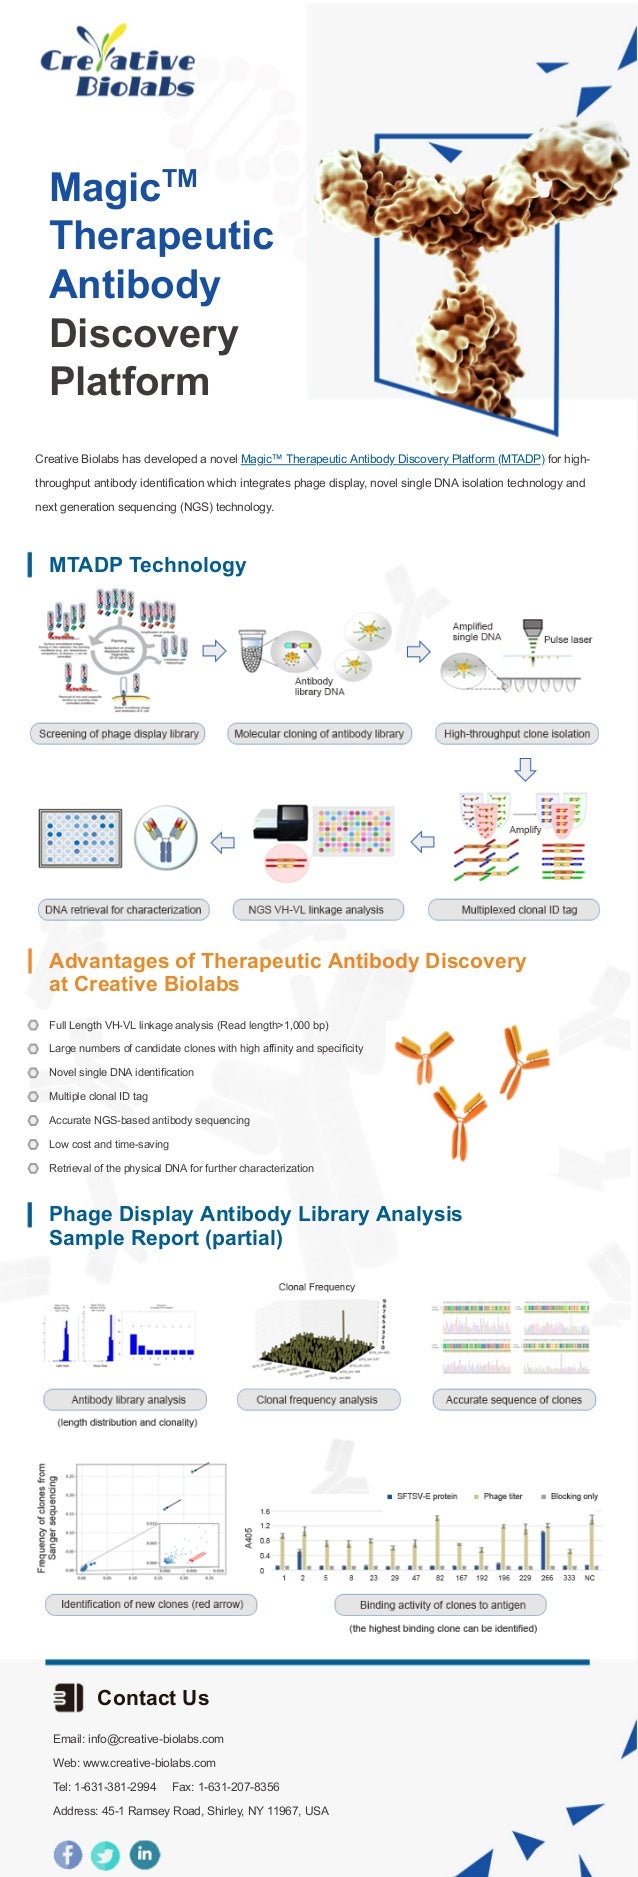 MagicTM
Therapeutic
Antibody
Discovery
Platform
Creative Biolabs has developed a novel Magic™ Therapeutic Antibody Discovery Platform (MTADP) for high-
throughput antibody identification which integrates phage display, novel single DNA isolation technology and
next generation sequencing (NGS) technology.
MTADP Technology
Advantages of Therapeutic Antibody Discovery
at Creative Biolabs
Full Length VH-VL linkage analysis (Read length>1,000 bp)
Large numbers of candidate clones with high affinity and specificity
Novel single DNA identification
Multiple clonal ID tag
Accurate NGS-based antibody sequencing
Low cost and time-saving
Retrieval of the physical DNA for further characterization
Phage Display Antibody Library Analysis
Sample Report (partial)
Contact Us
Email: info@creative-biolabs.com
Web: www.creative-biolabs.com
Tel: 1-631-381-2994 Fax: 1-631-207-8356
Address: 45-1 Ramsey Road, Shirley, NY 11967, USA
 